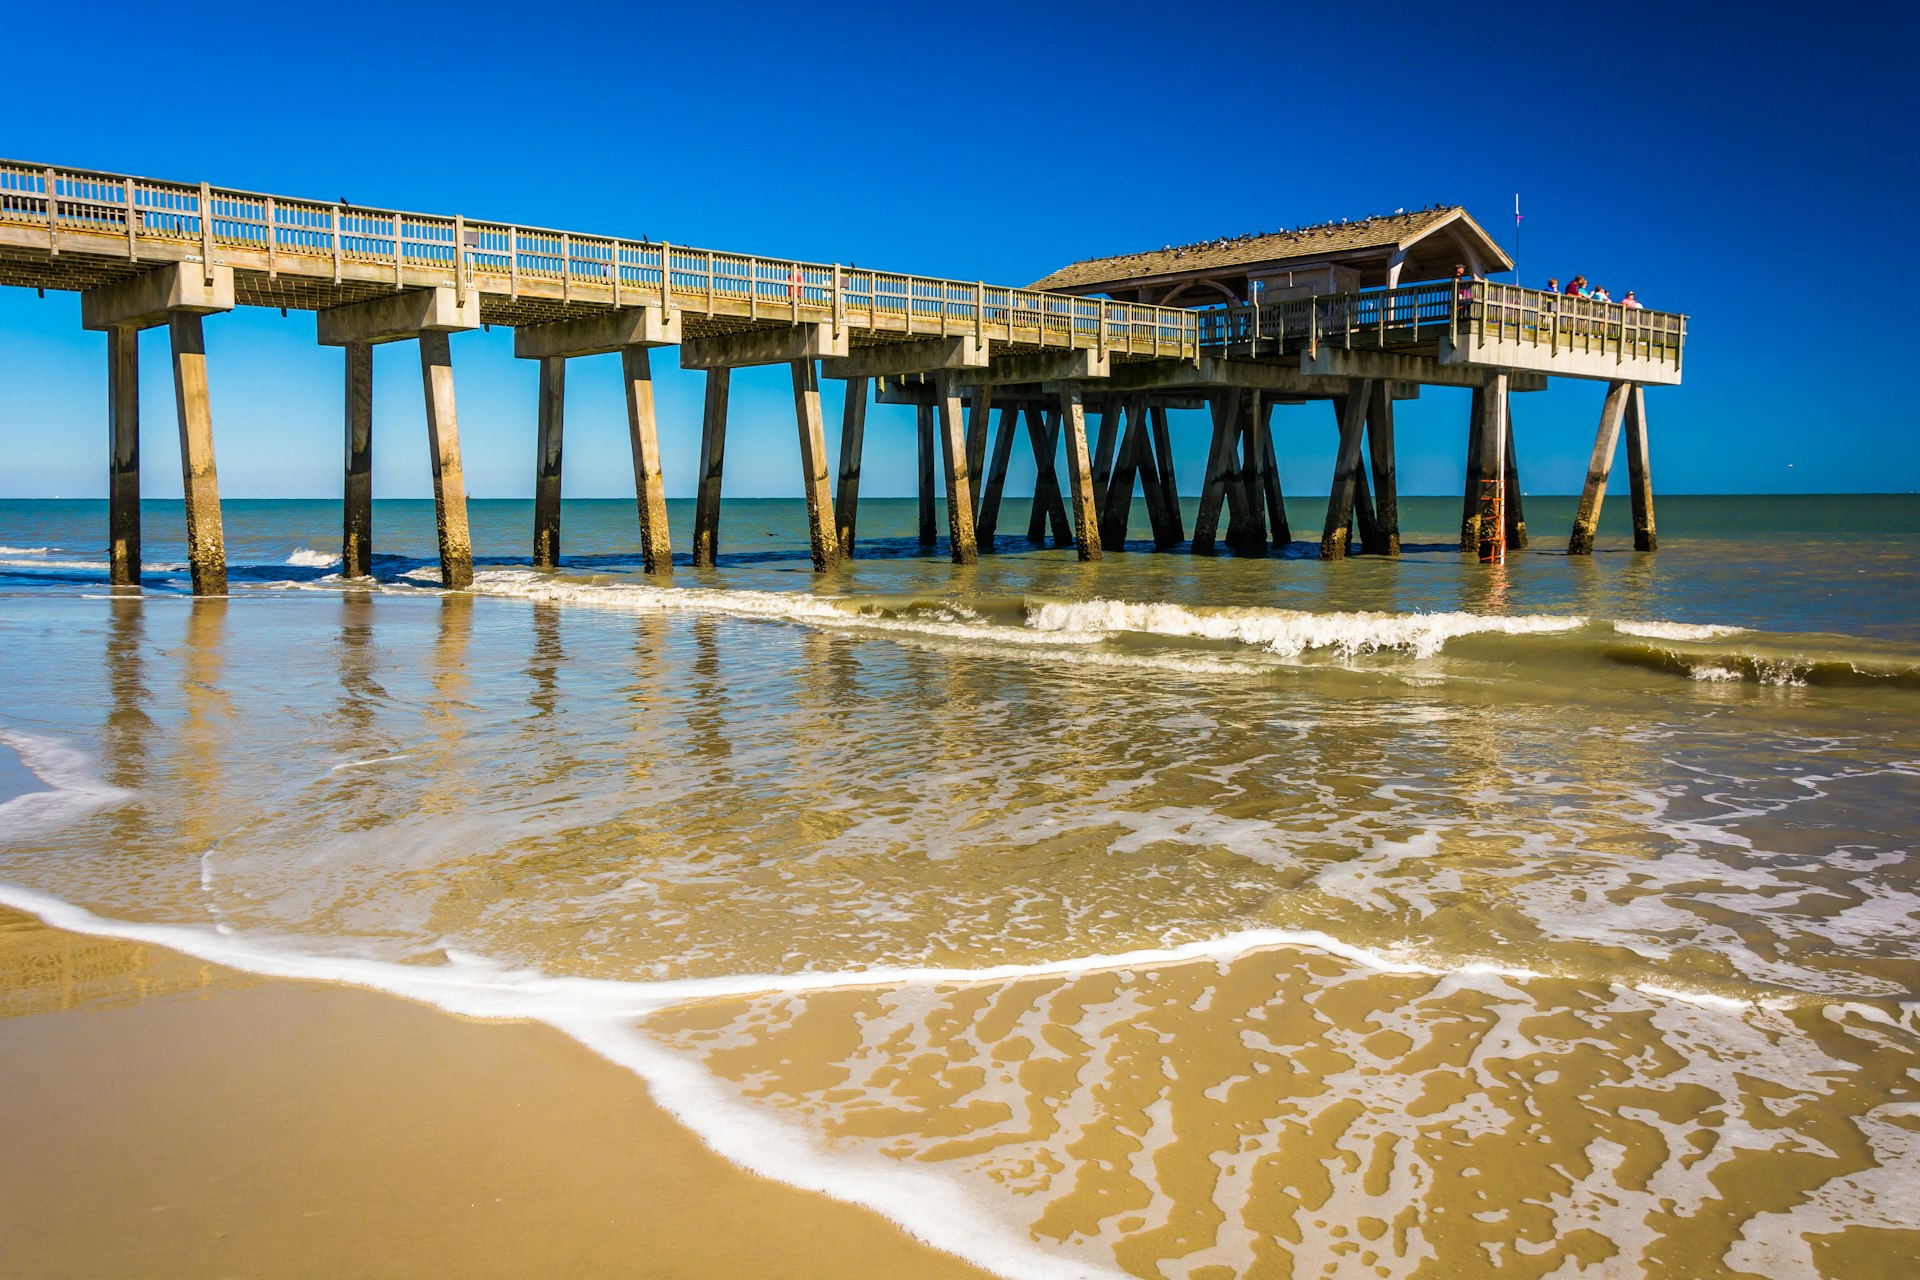 The fishing pier and Atlantic Ocean at Tybee Island, Georgia. ©AppalachianViews/Getty Images